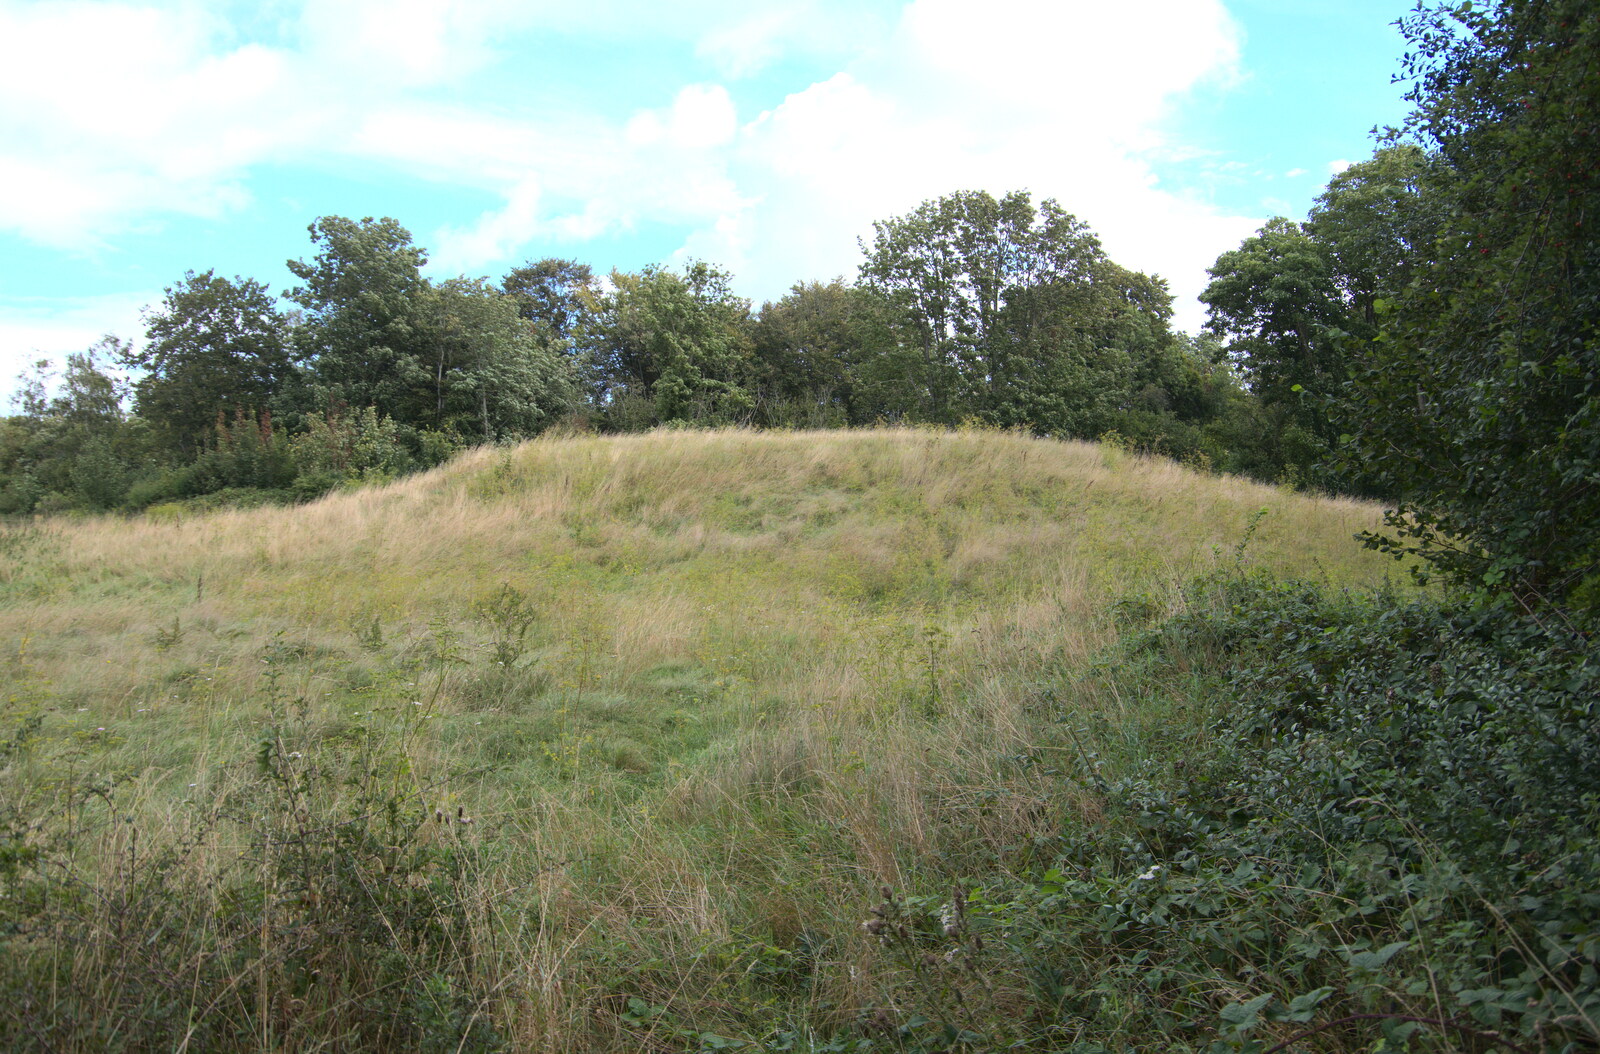 A tumulus in the woods from Stone Circles: Stonehenge and Avebury, Wiltshire - 22nd August 2020